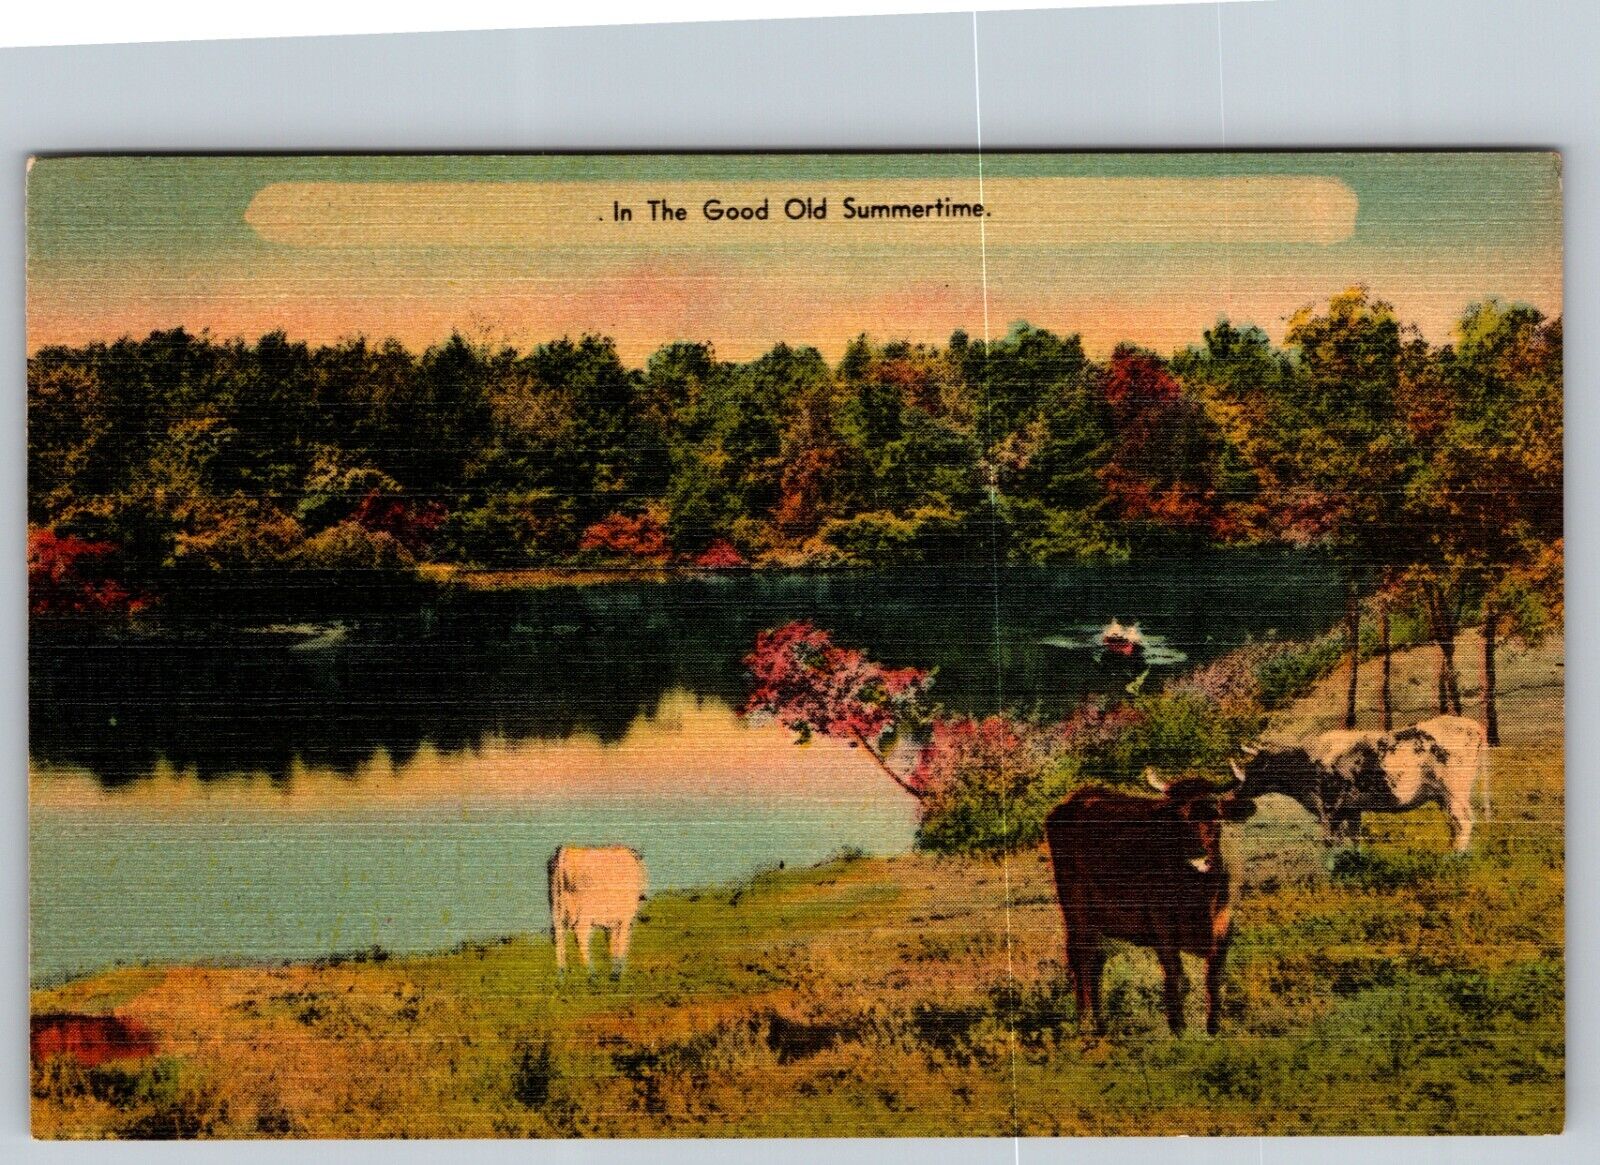 COWS SCENICFERNDALE NEW YORK NY GREETINGS VIEW POSTCARD VINTAGE POSTCARD